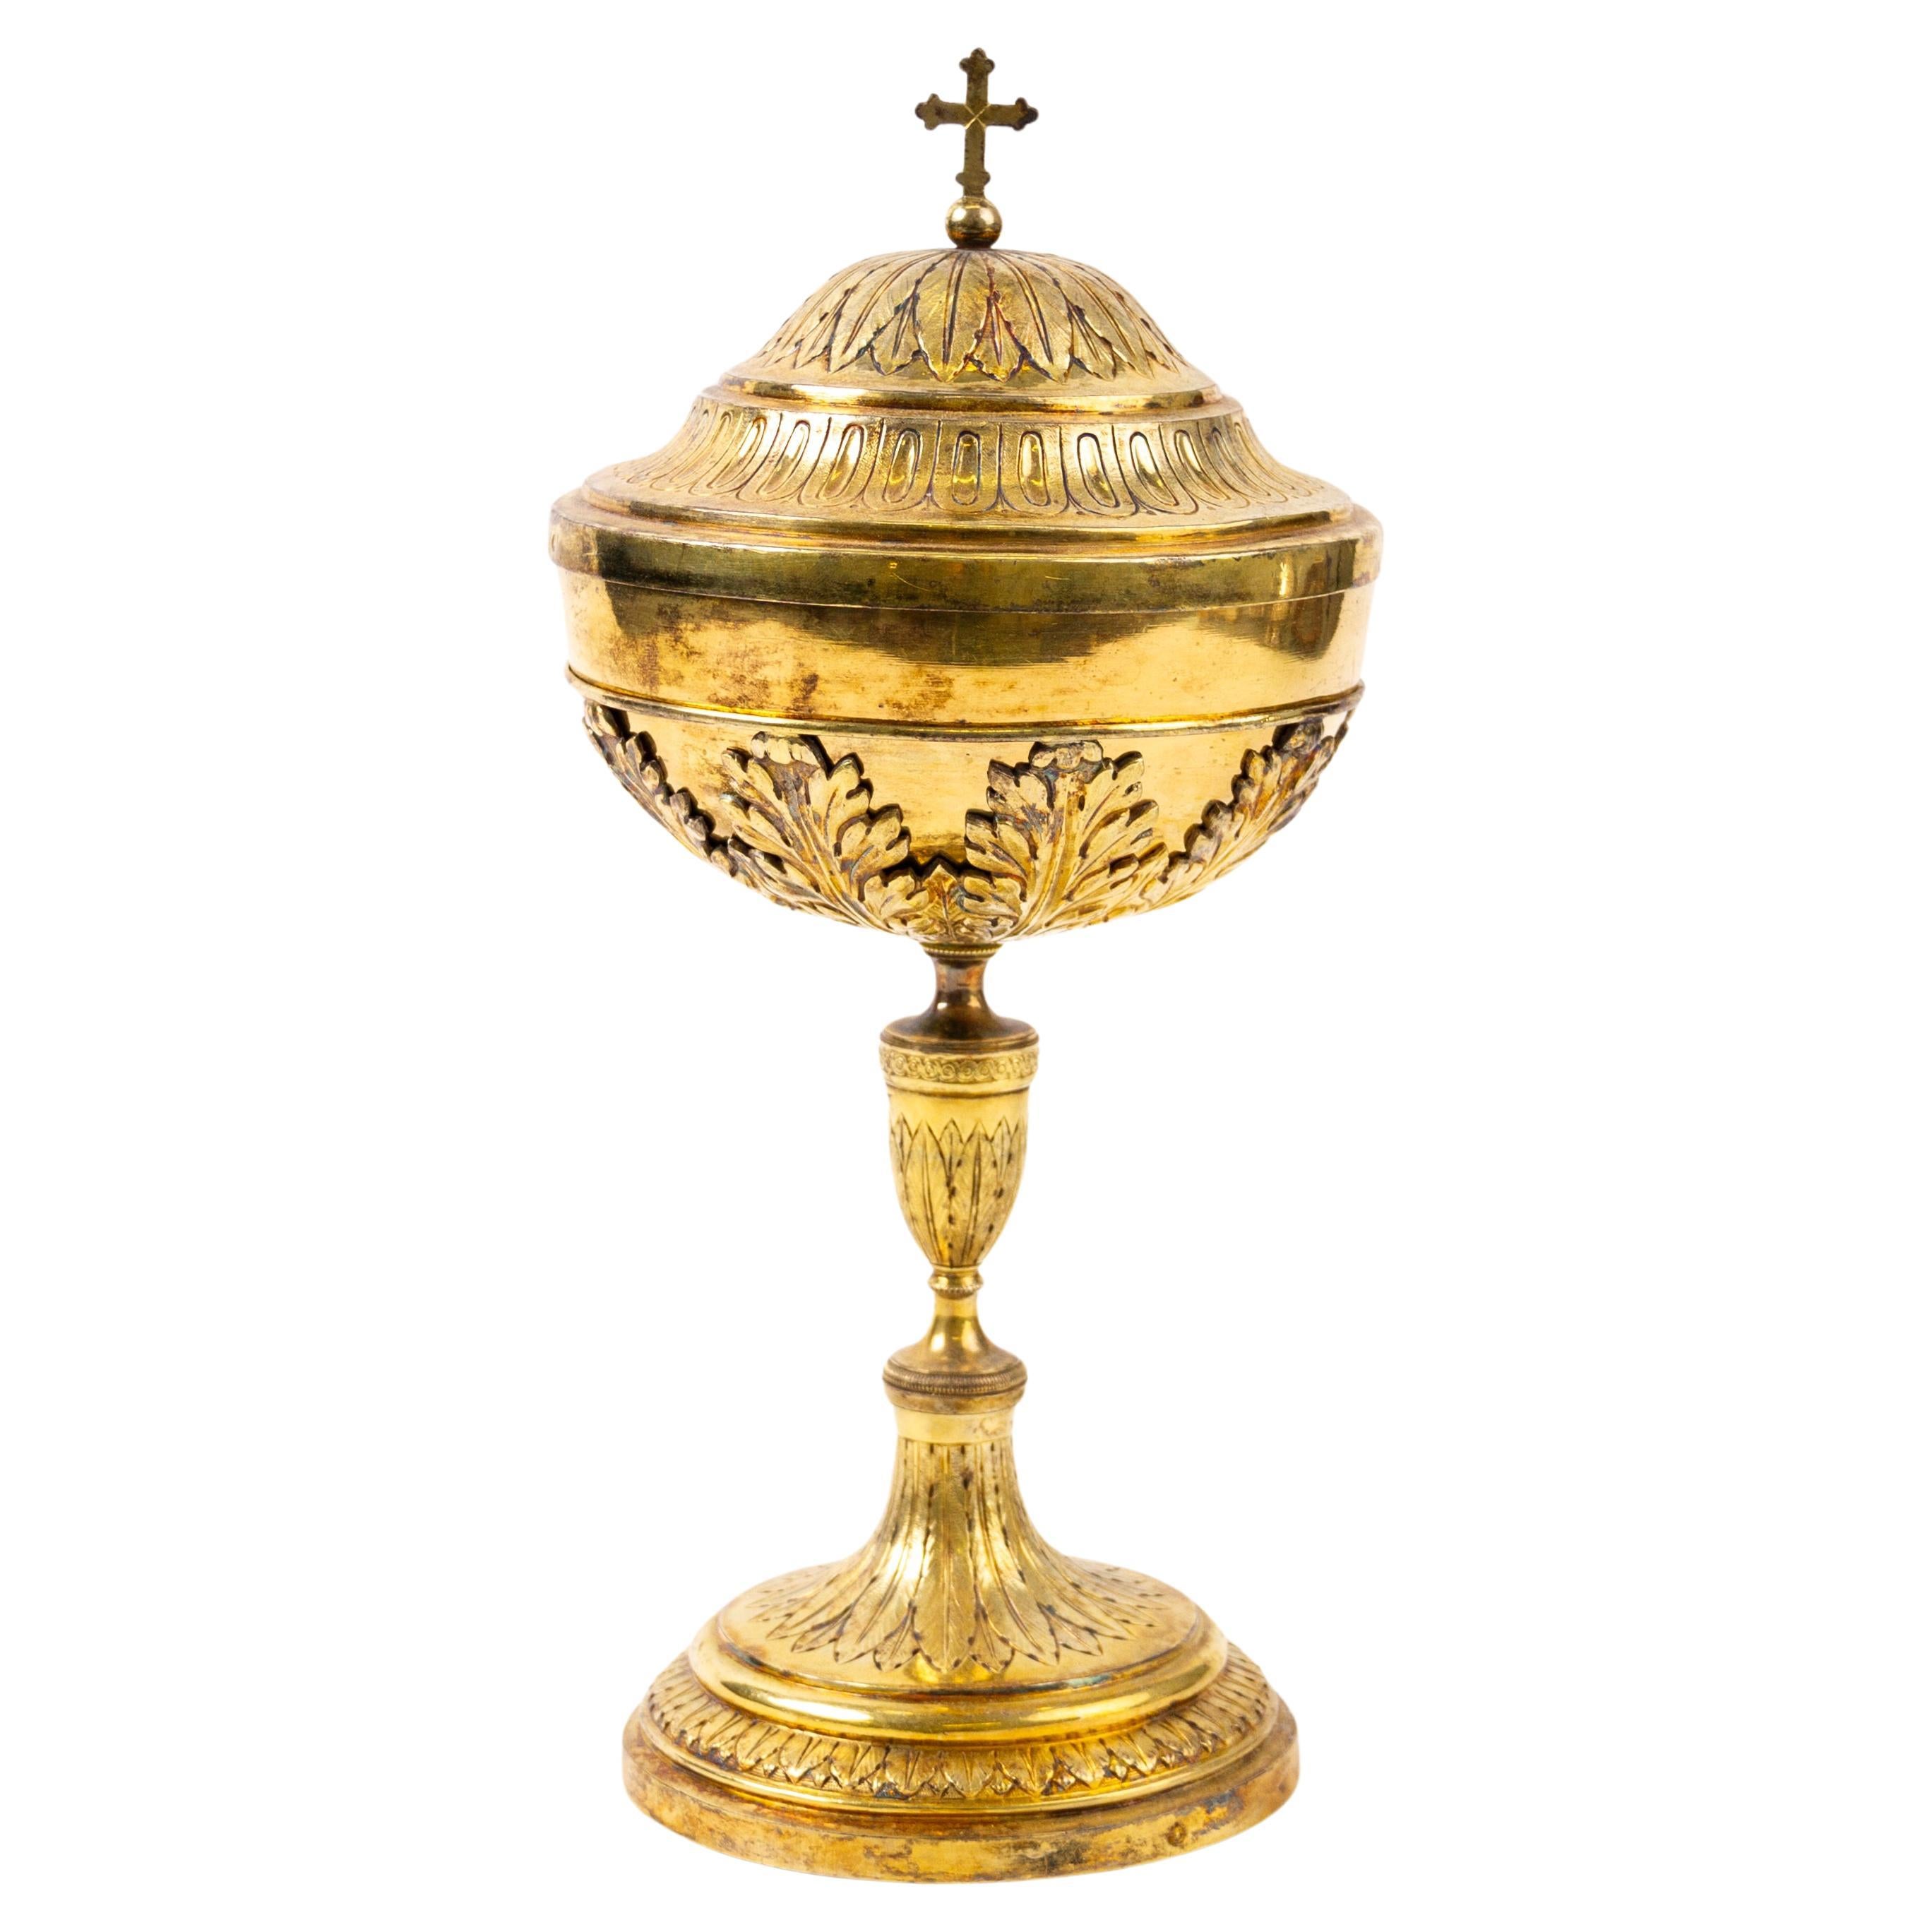 Stefano Sciolet II (ca. 1830 Rome) 889 Silver Gilt Ciborium with Papal Marks For Sale